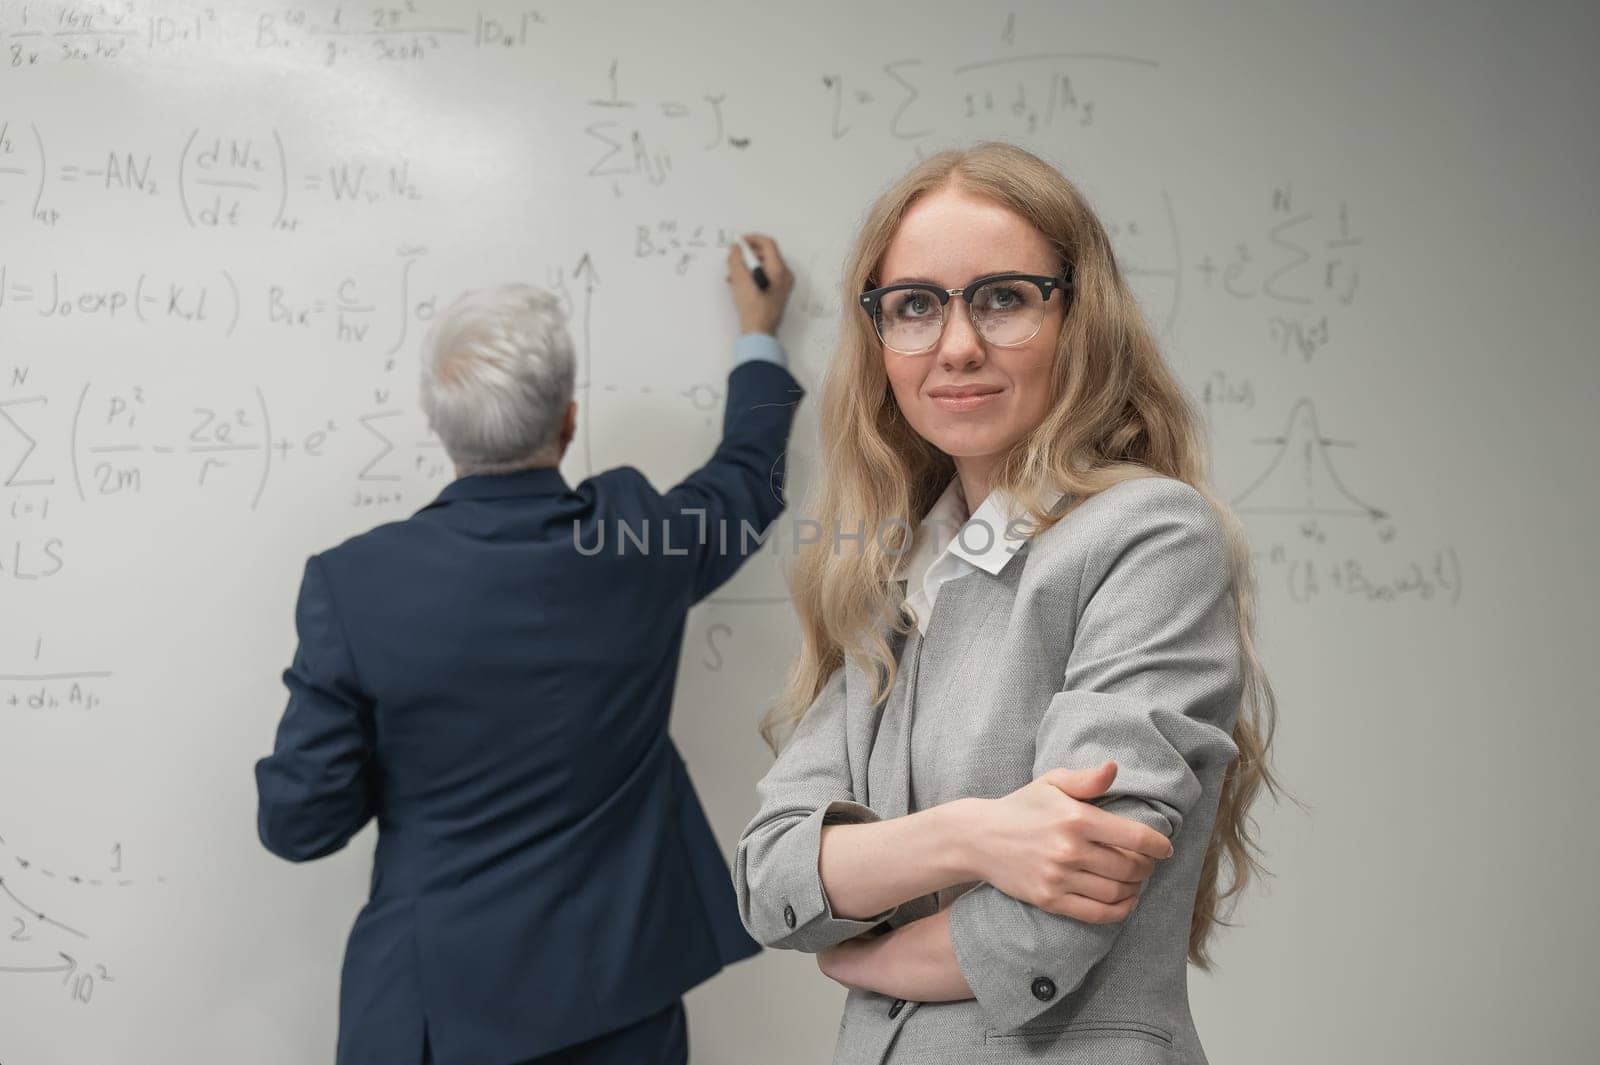 An elderly man writes on a white board and a young woman stands thoughtfully